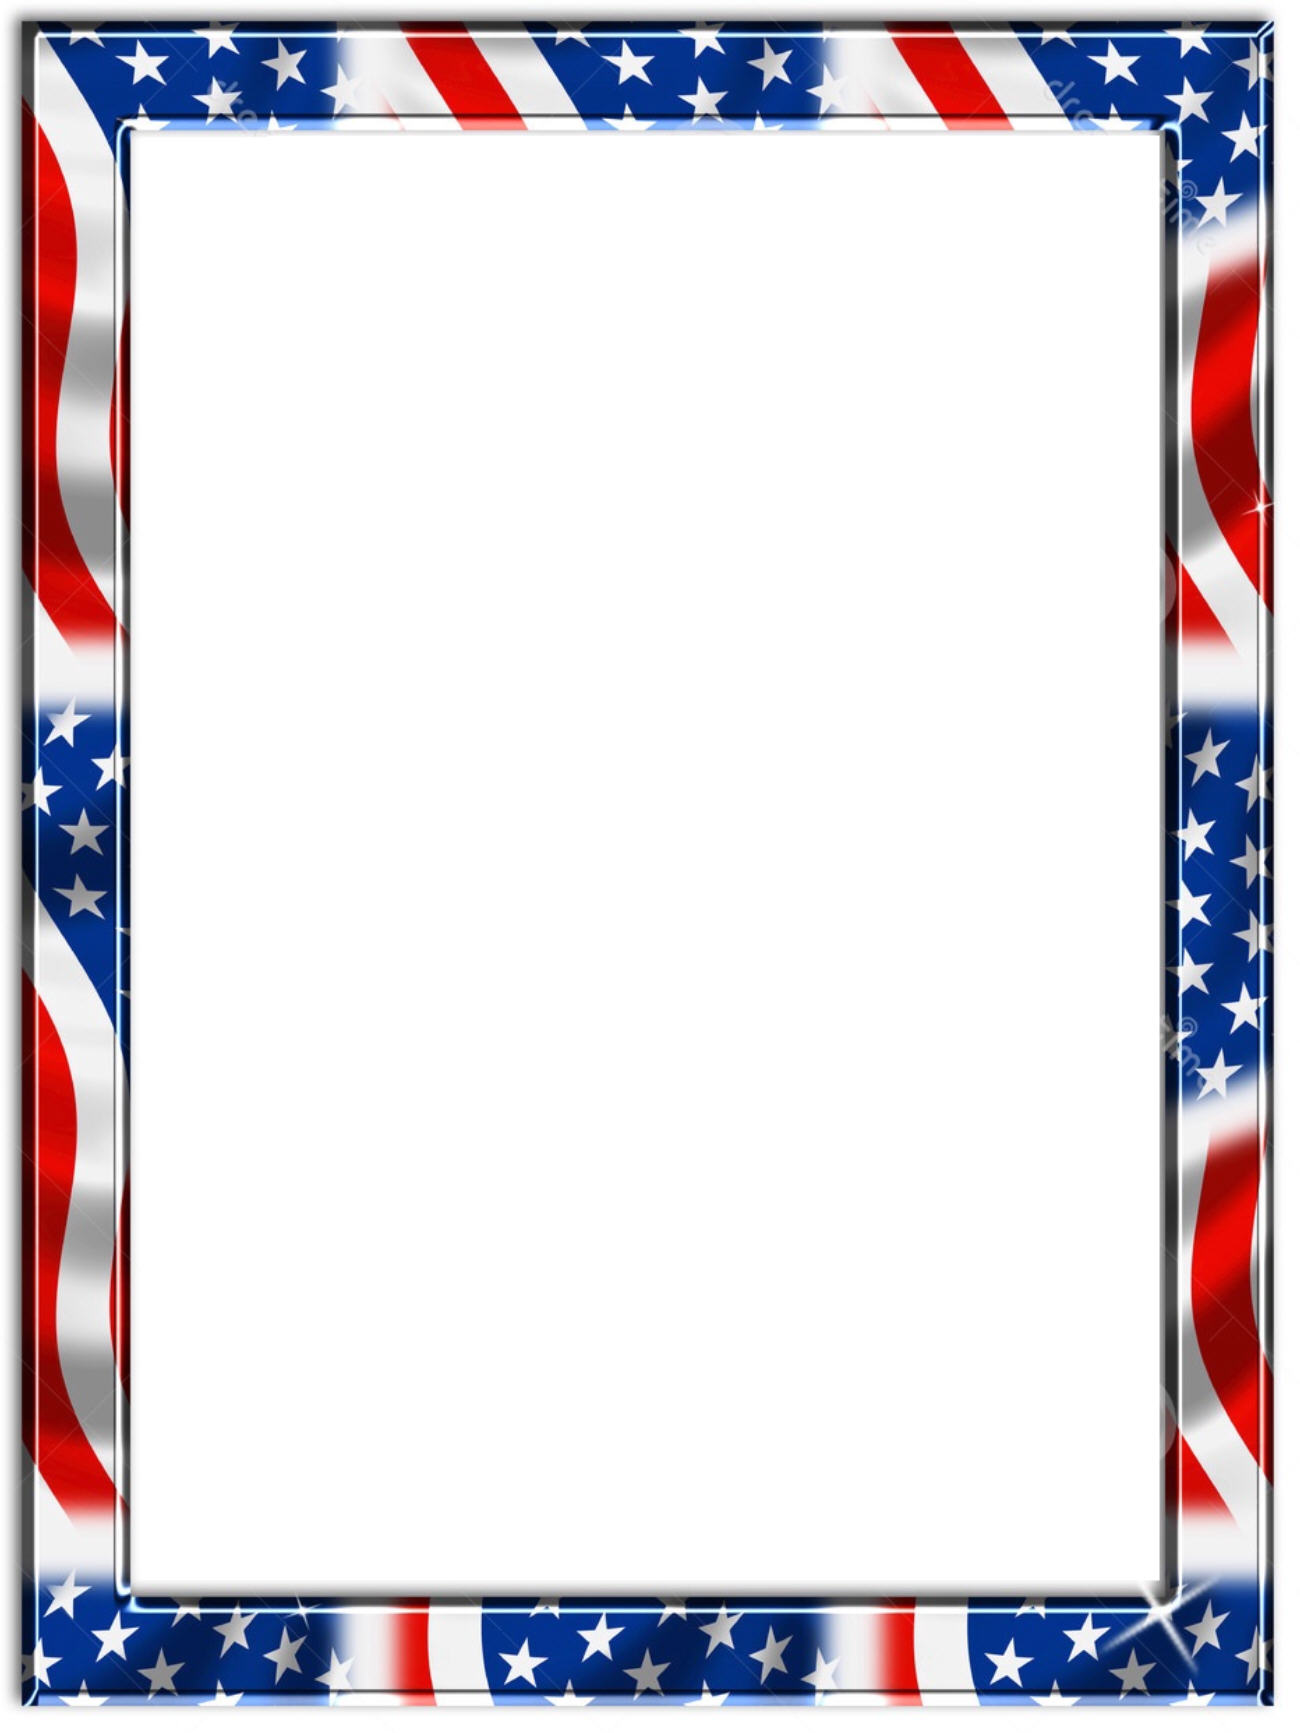 veterans-day-border-free-download-on-clipartmag